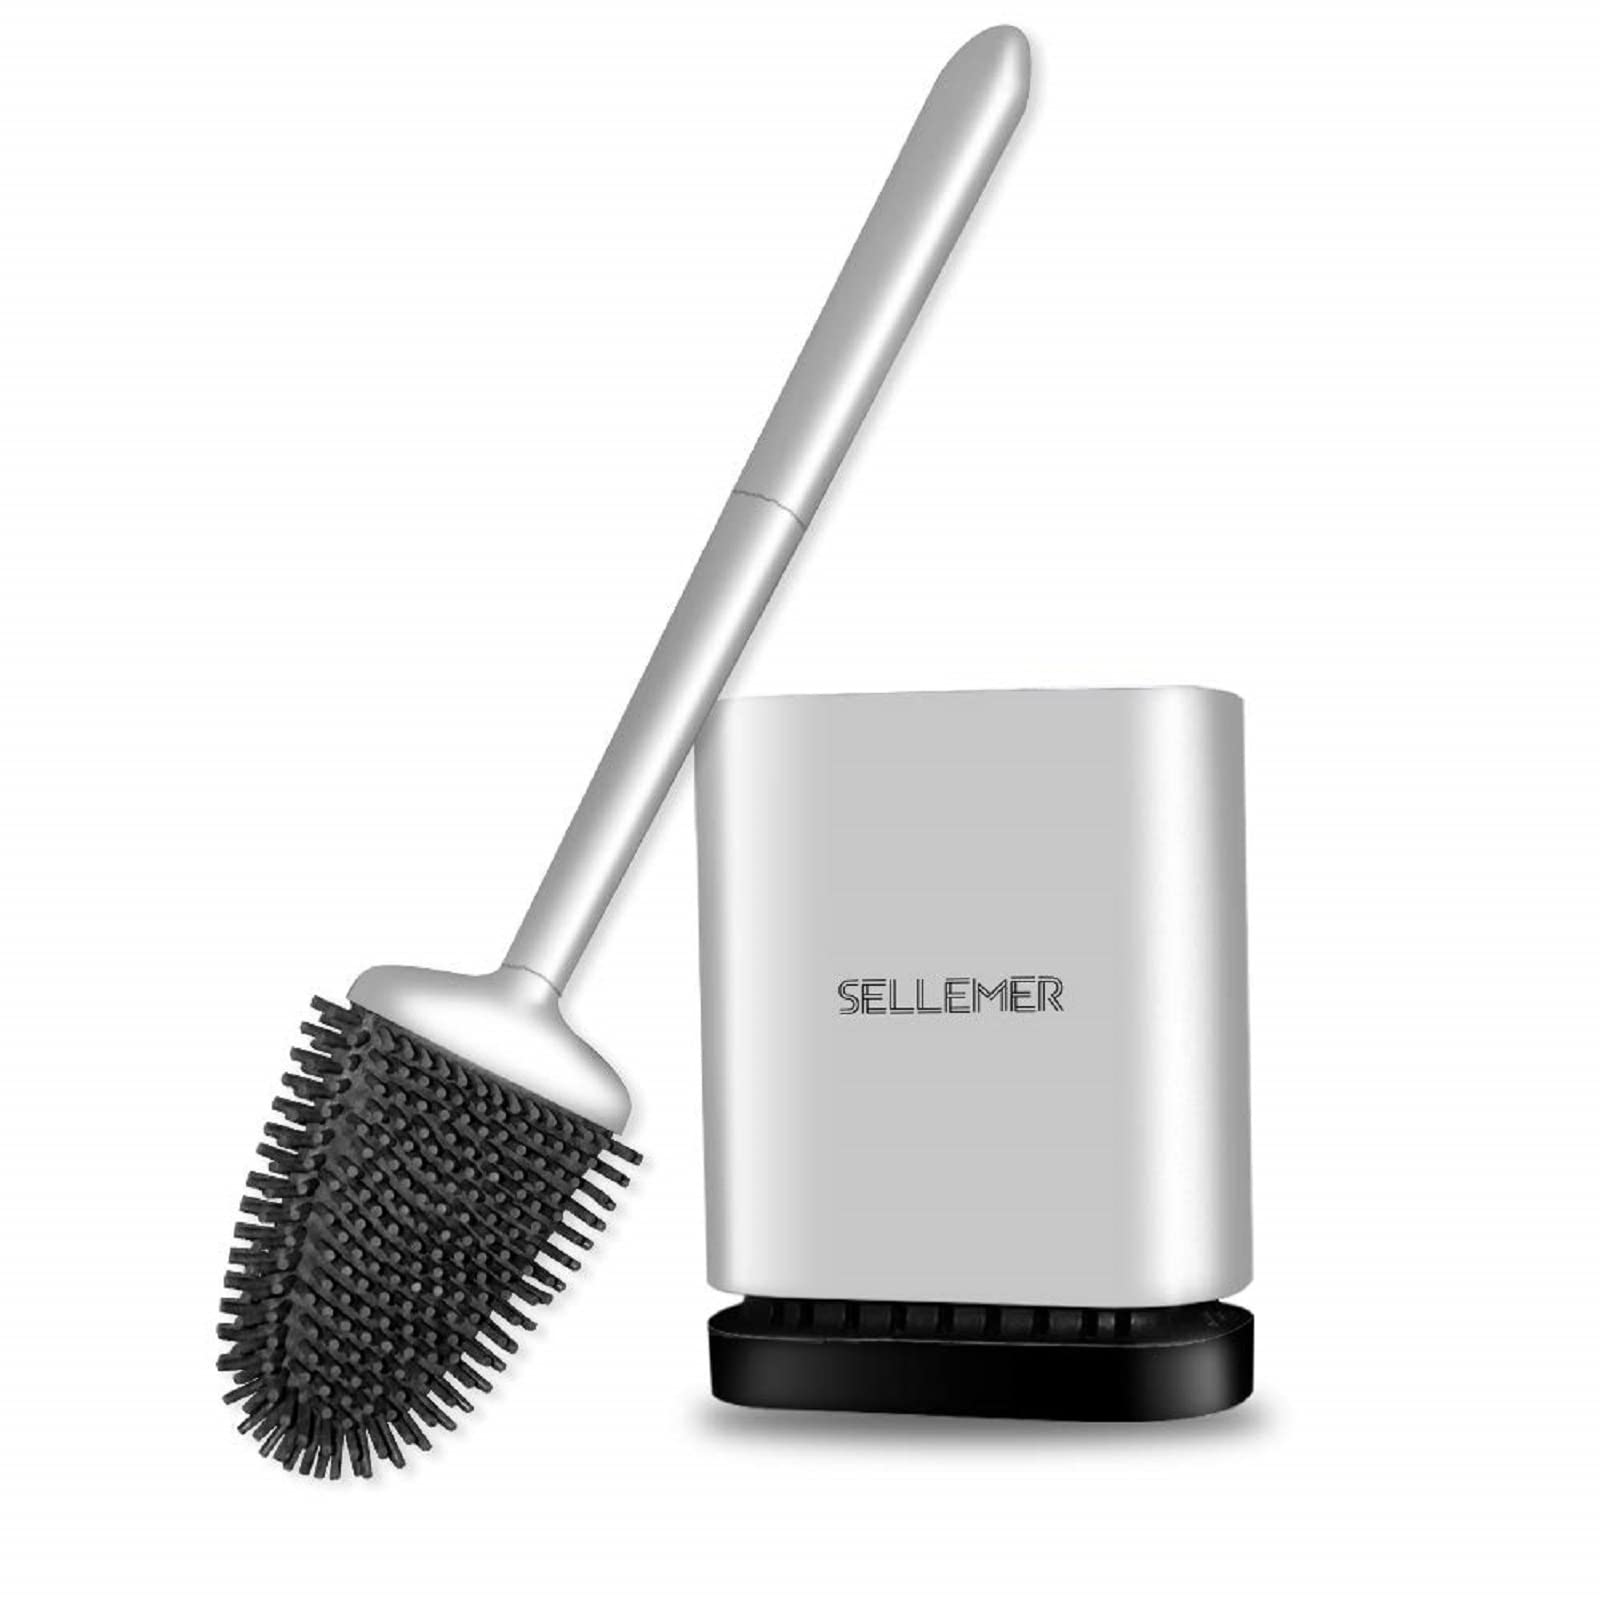 Sellemer Toilet Brush and Holder Set for Bathroom Flexible Toilet Bowl Brush  Head with Silicone Bristles Compact Size for Storage and Organization  Ventilation Slots Base (Silver) Silver 1 PACK